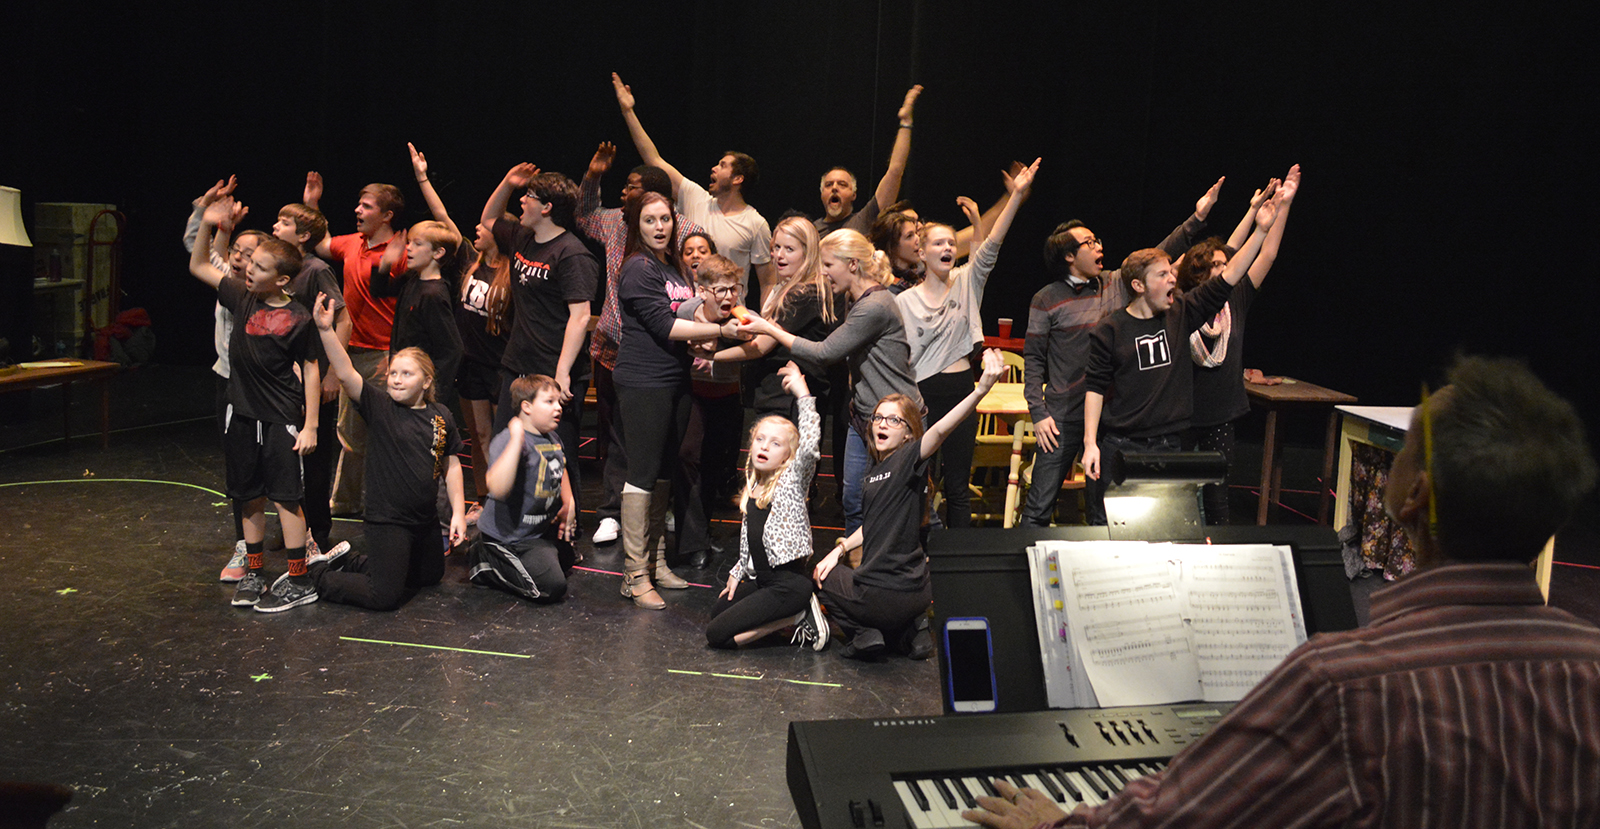 A group of students pose dramatically with their arms up as they sing in a rehearsal space while a music director at the piano watches them in the foreground.